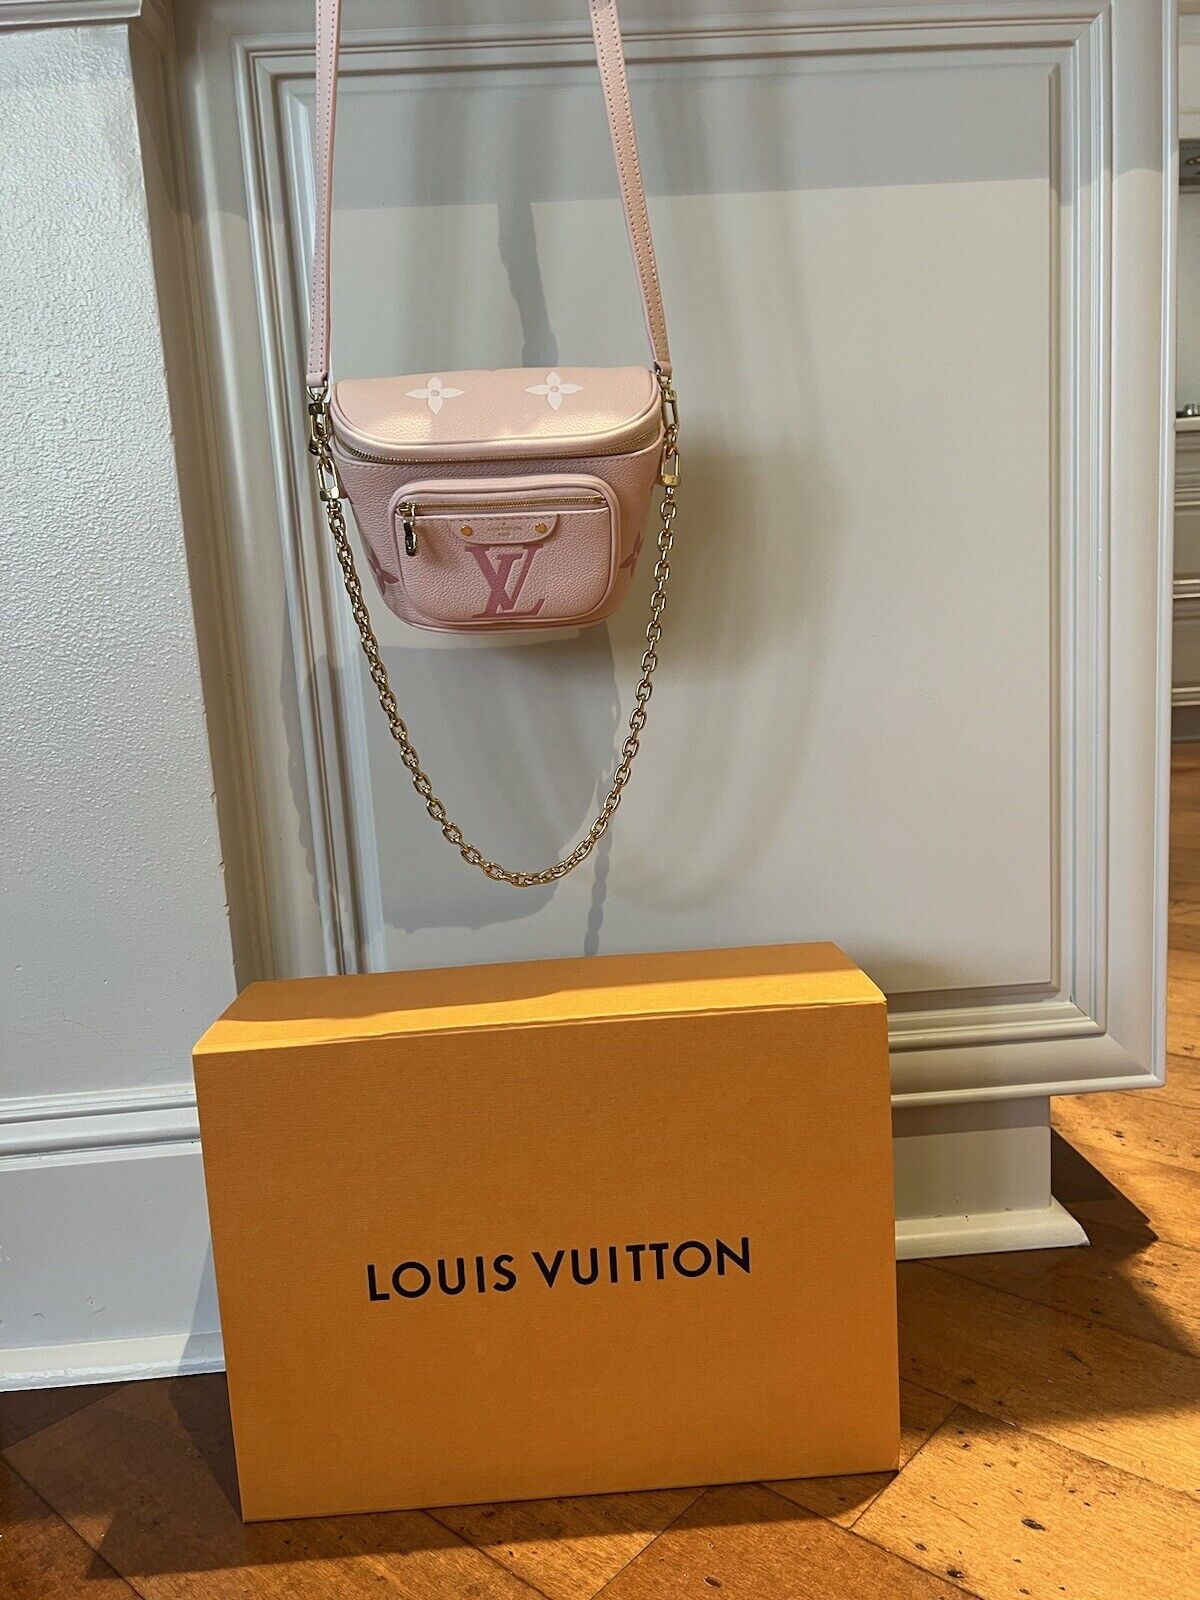 ✨NEW✨LV MINI BUMBAG + my favorite summer products and clothing